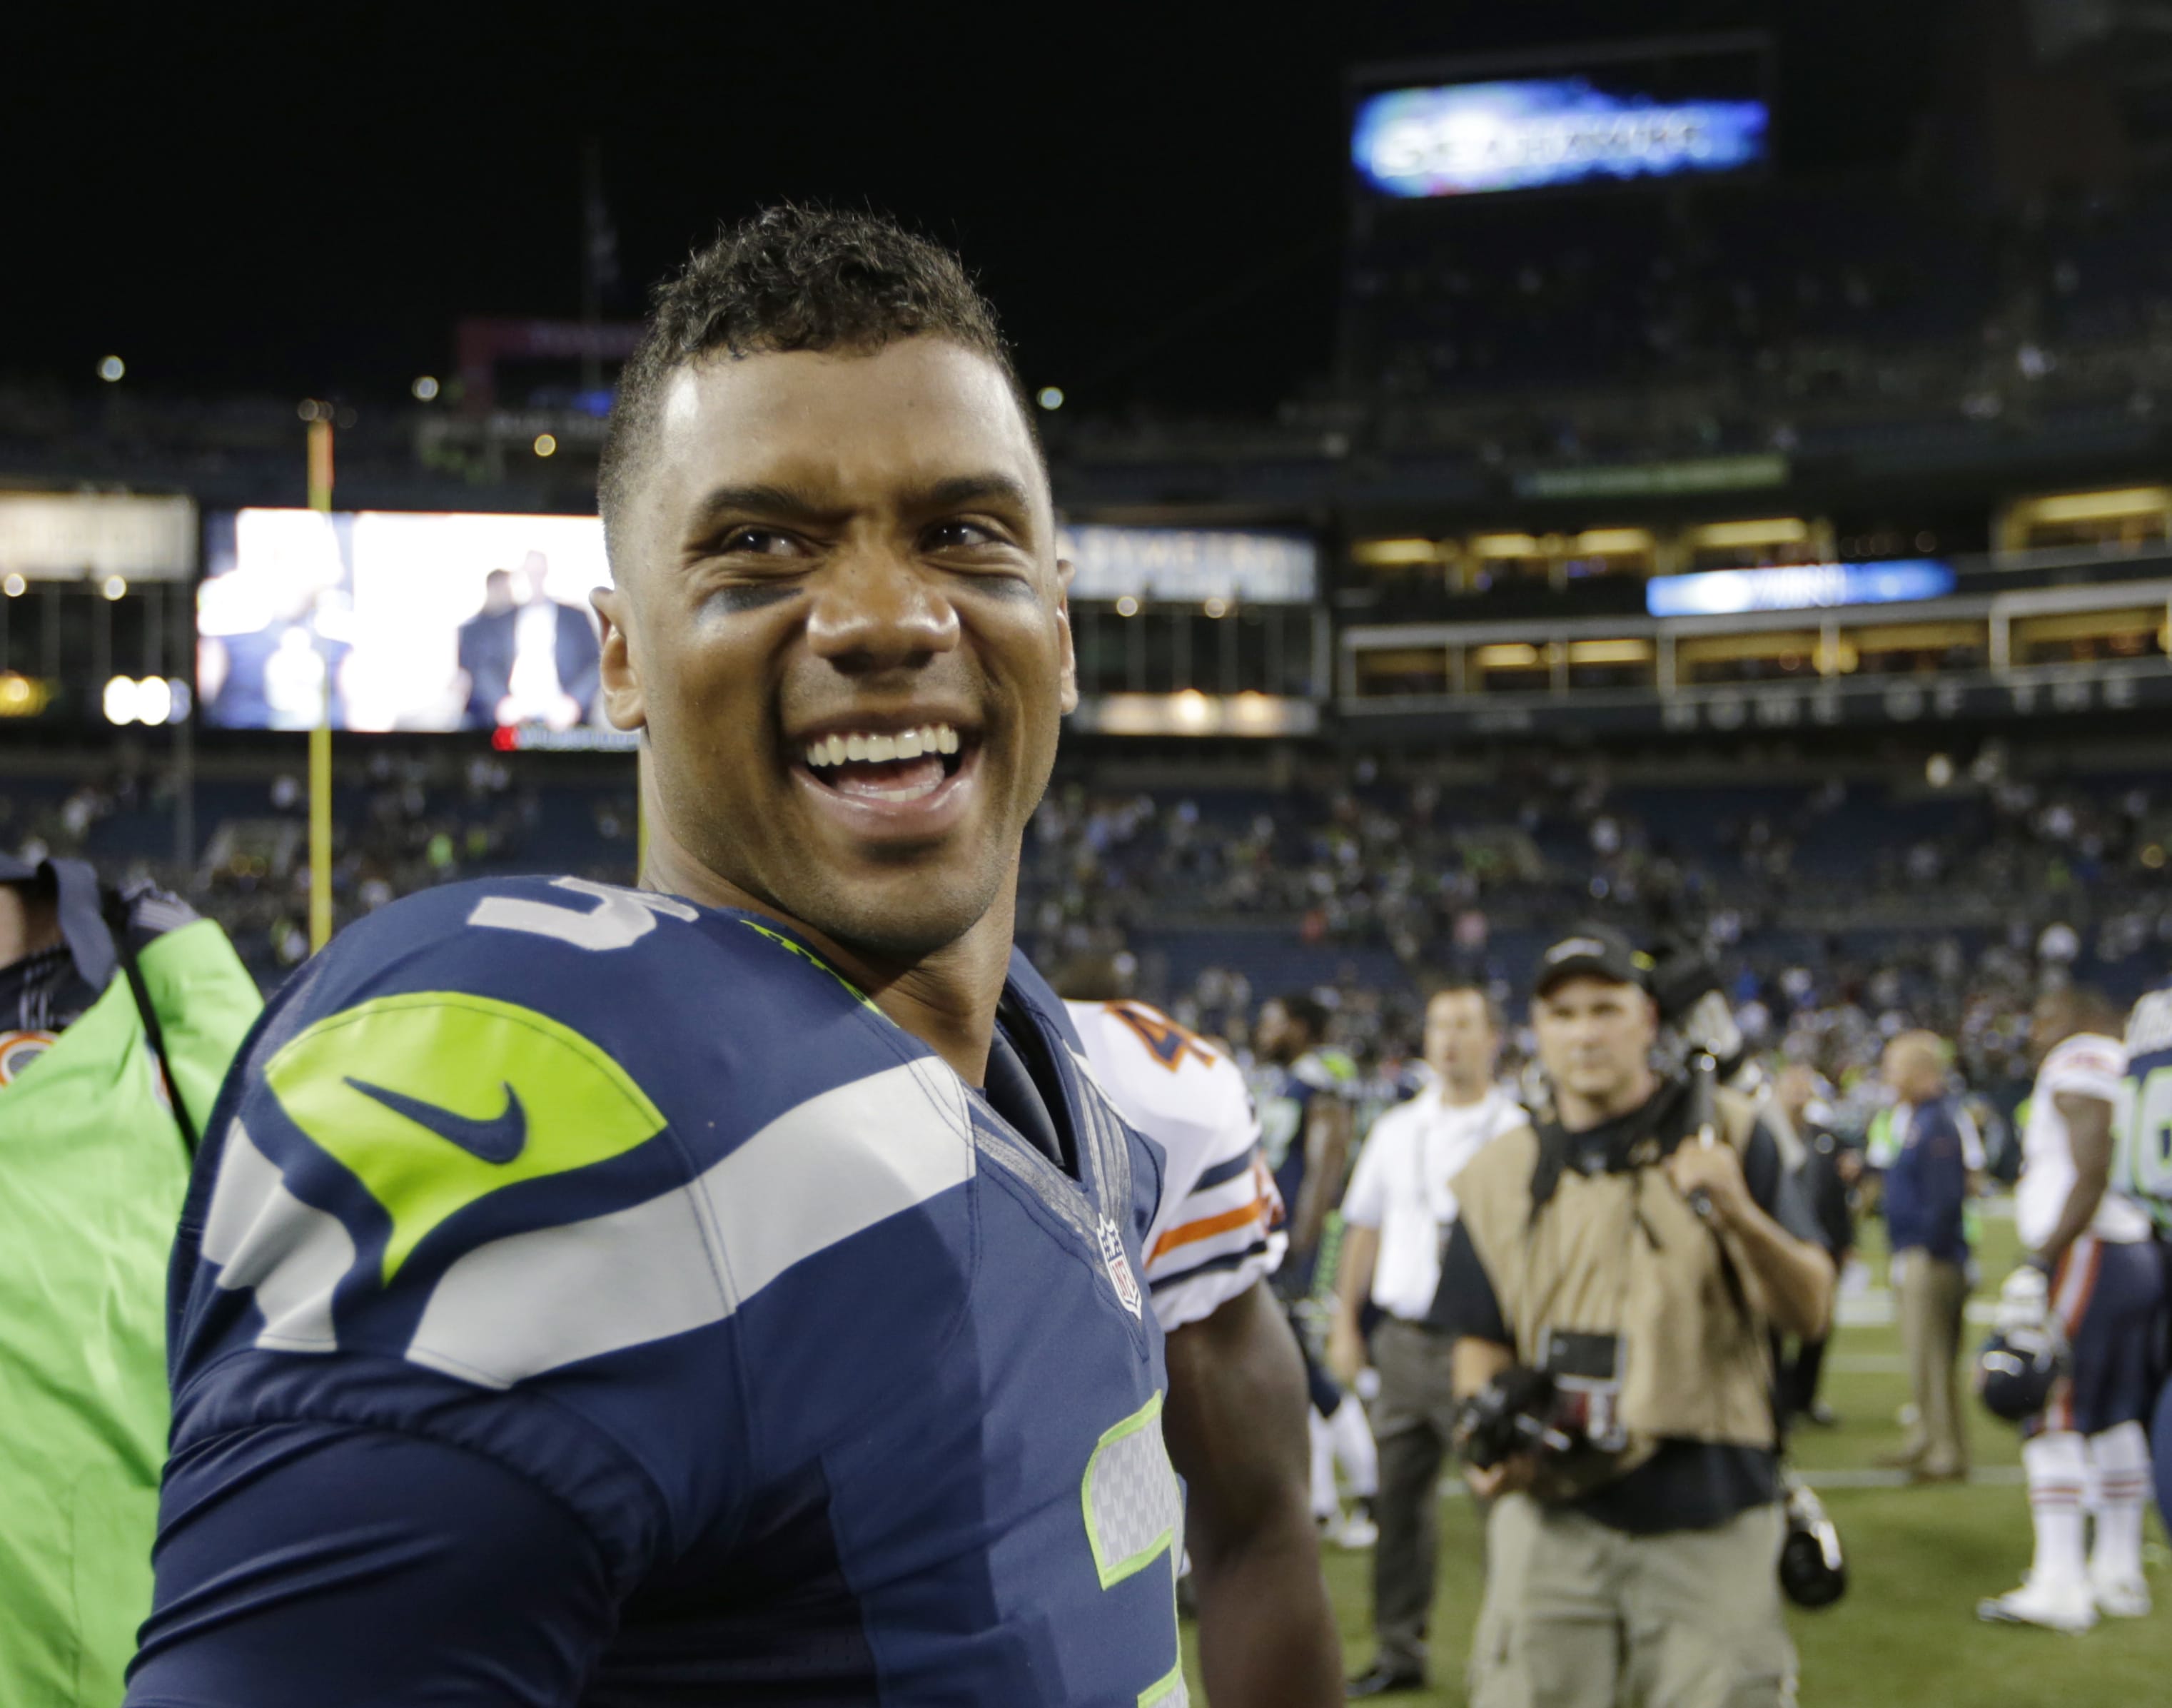 Seattle Seahawks quarterback Russell Wilson (3) smiles after the Seahawks' 34-6 win over the Chicago Bears in a preseason NFL football game Friday in Seattle.